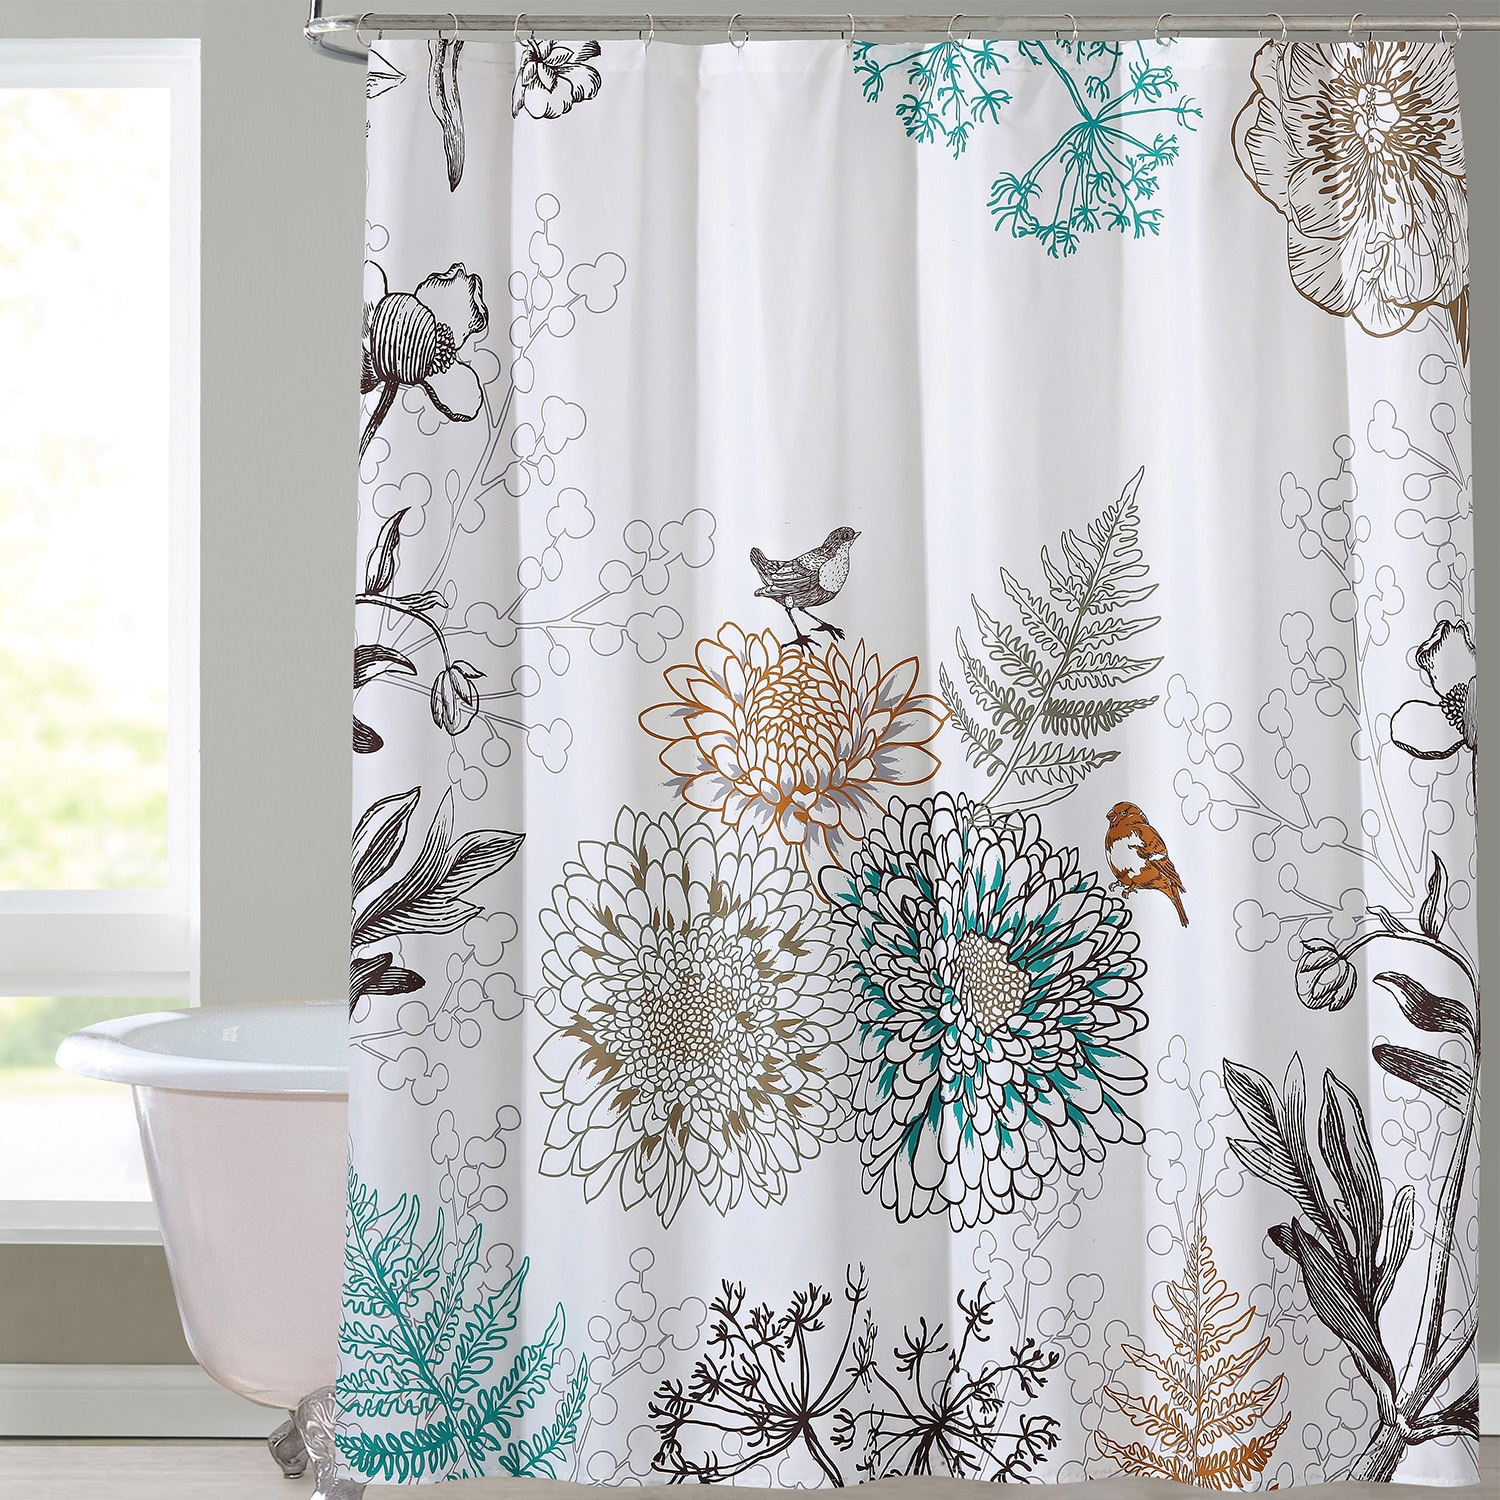 Fashion Floral Pattern Waterproof Bathroom Shower Curtain With Hooks 4 Colors 